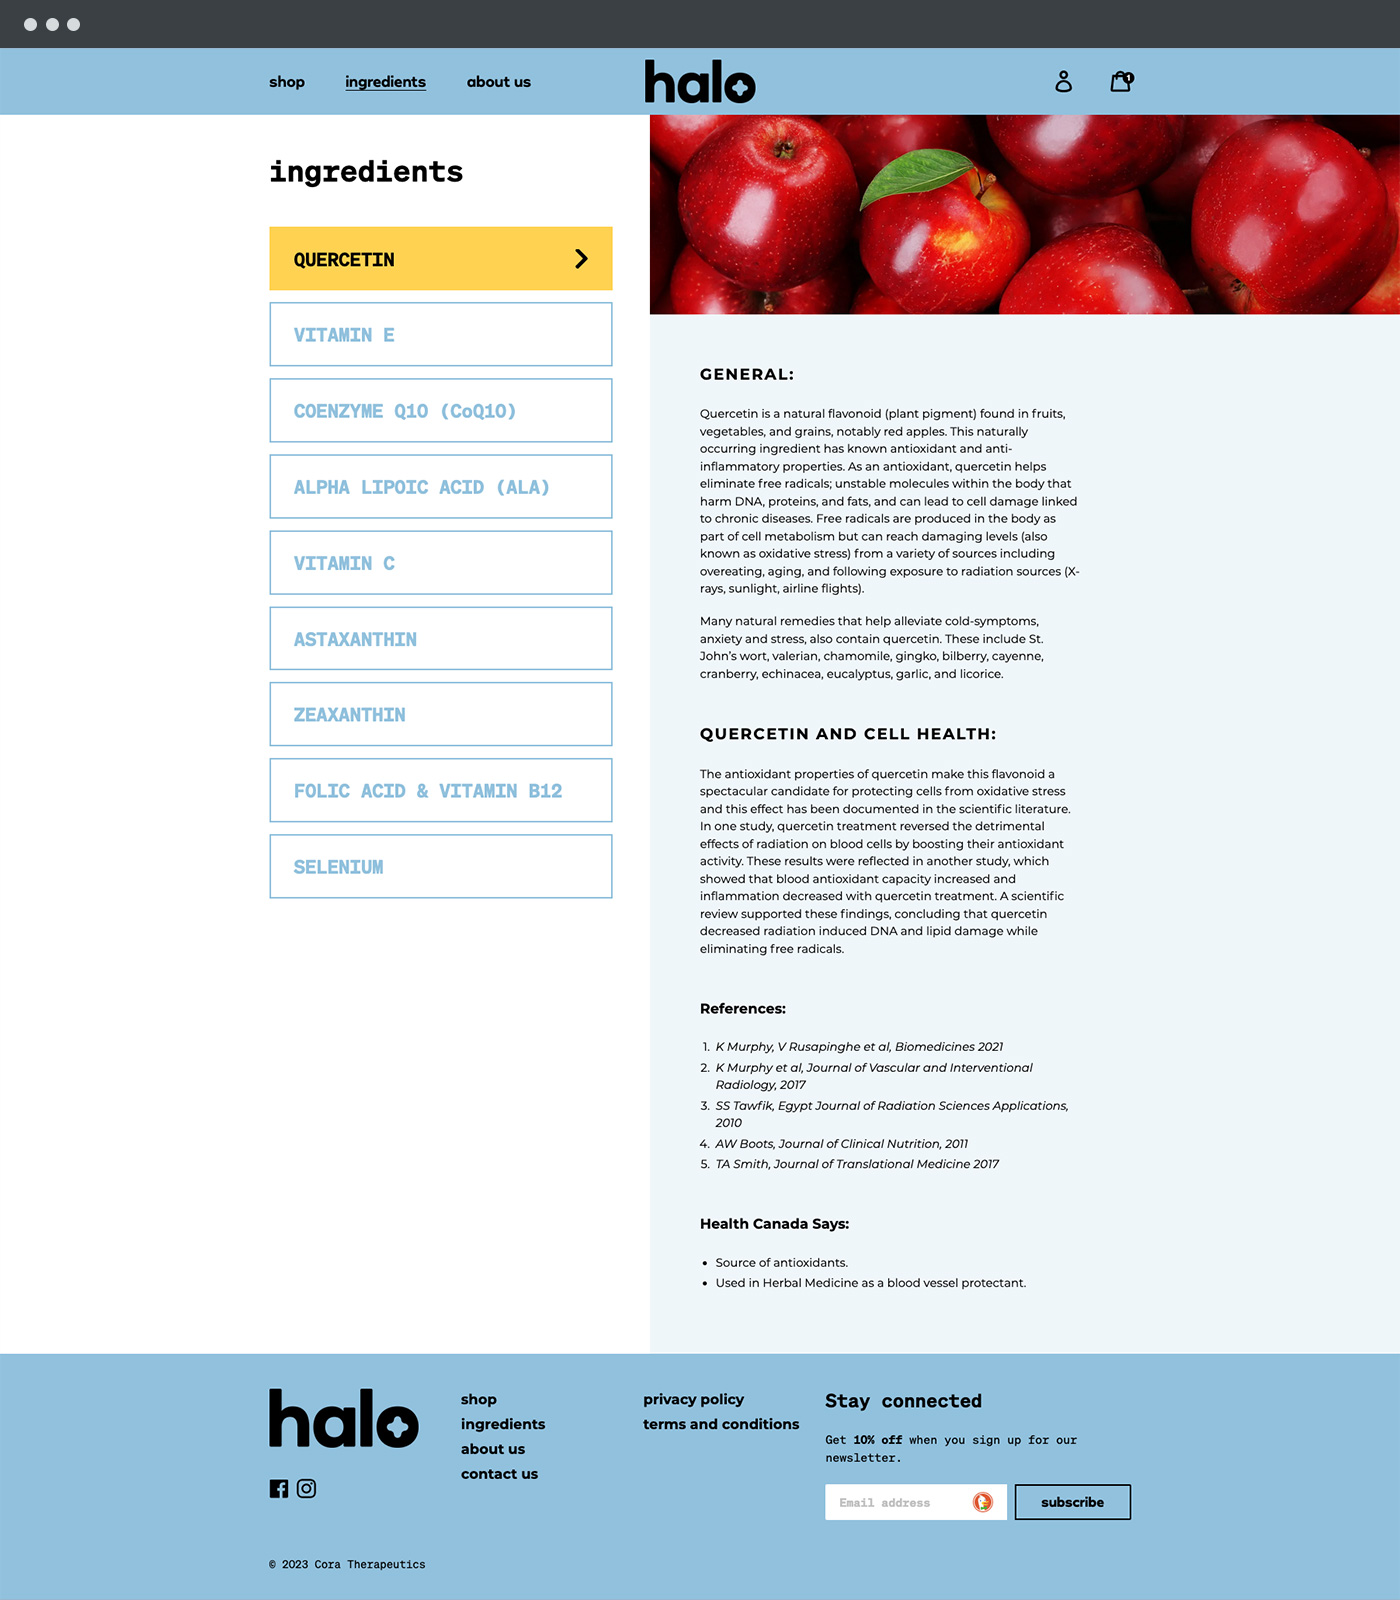 halo Shopify ingredients page design